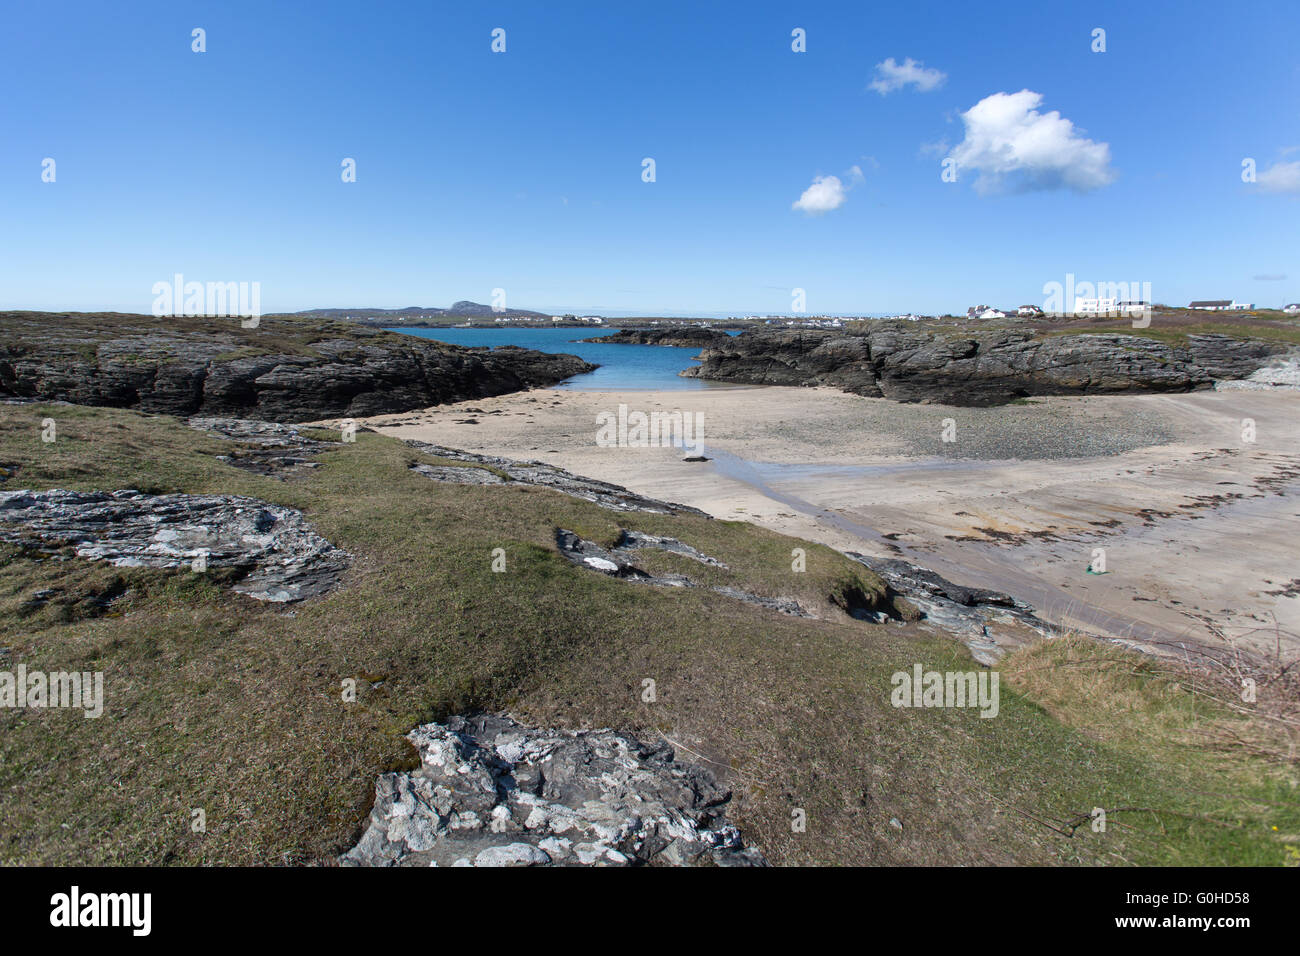 The Wales and Anglesey Coastal Path in North Wales. Picturesque view of Porth Castell beach at Trearddur Bay. Stock Photo